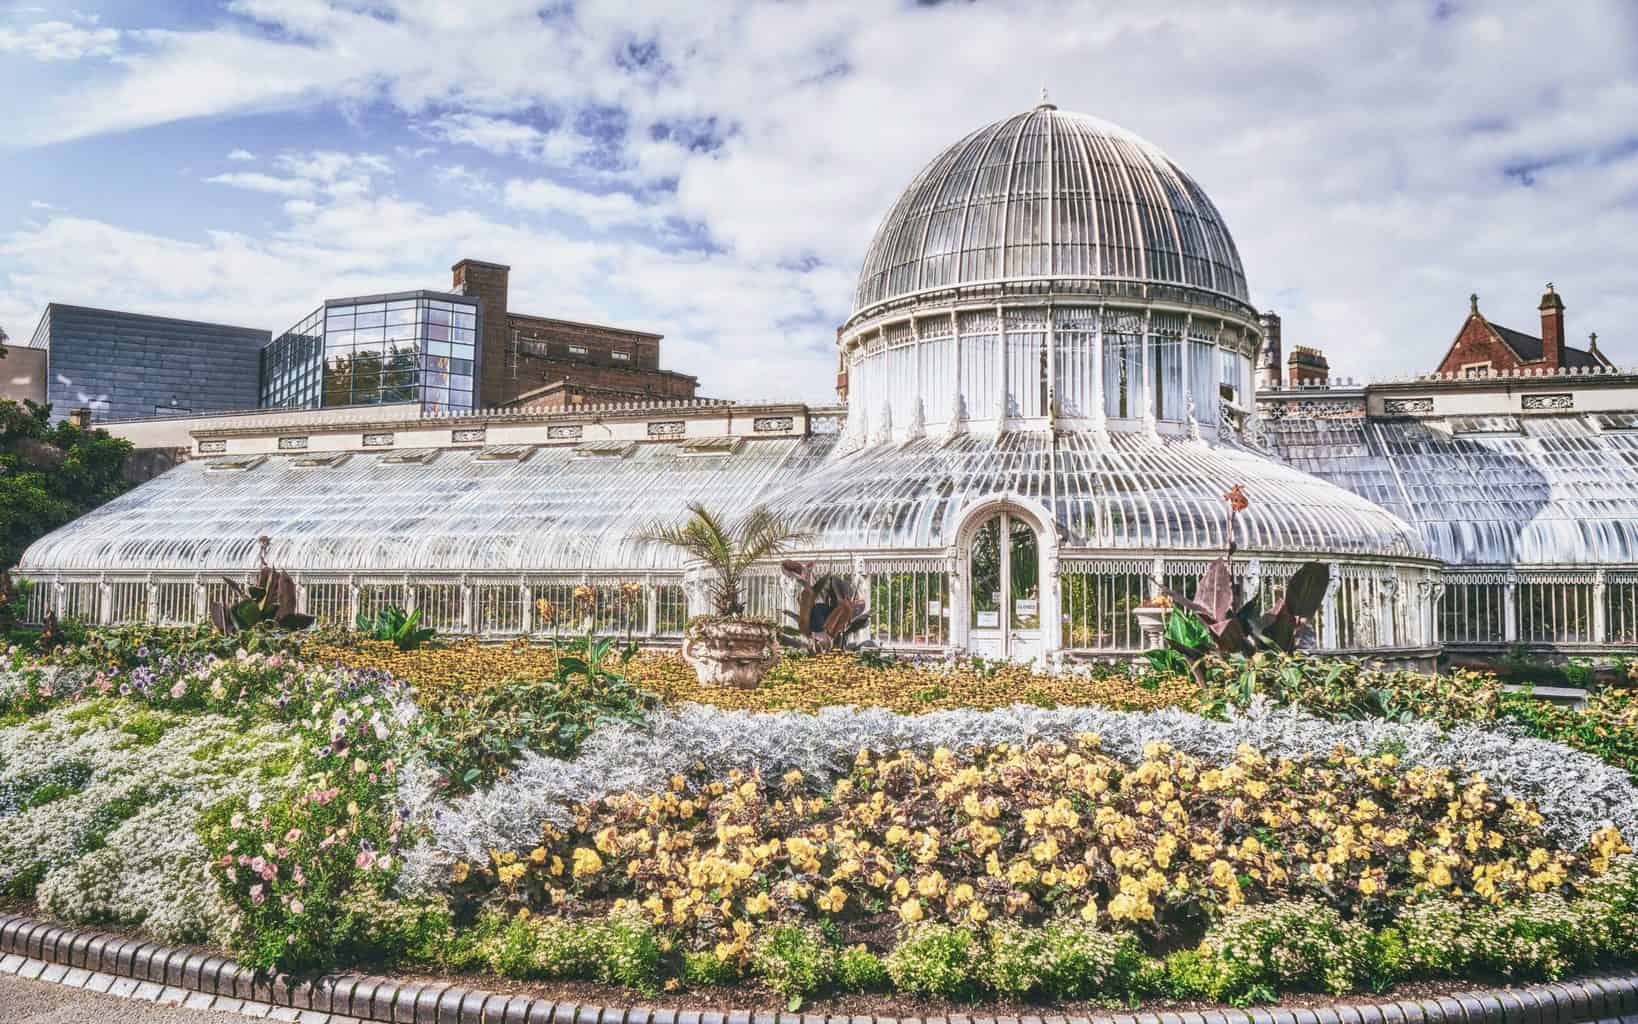 The greenhouse, adorned with a floral display, at the Botanic Gardens in the Queen's Quarter of Belfast, County Antrim (Sep., 2021).